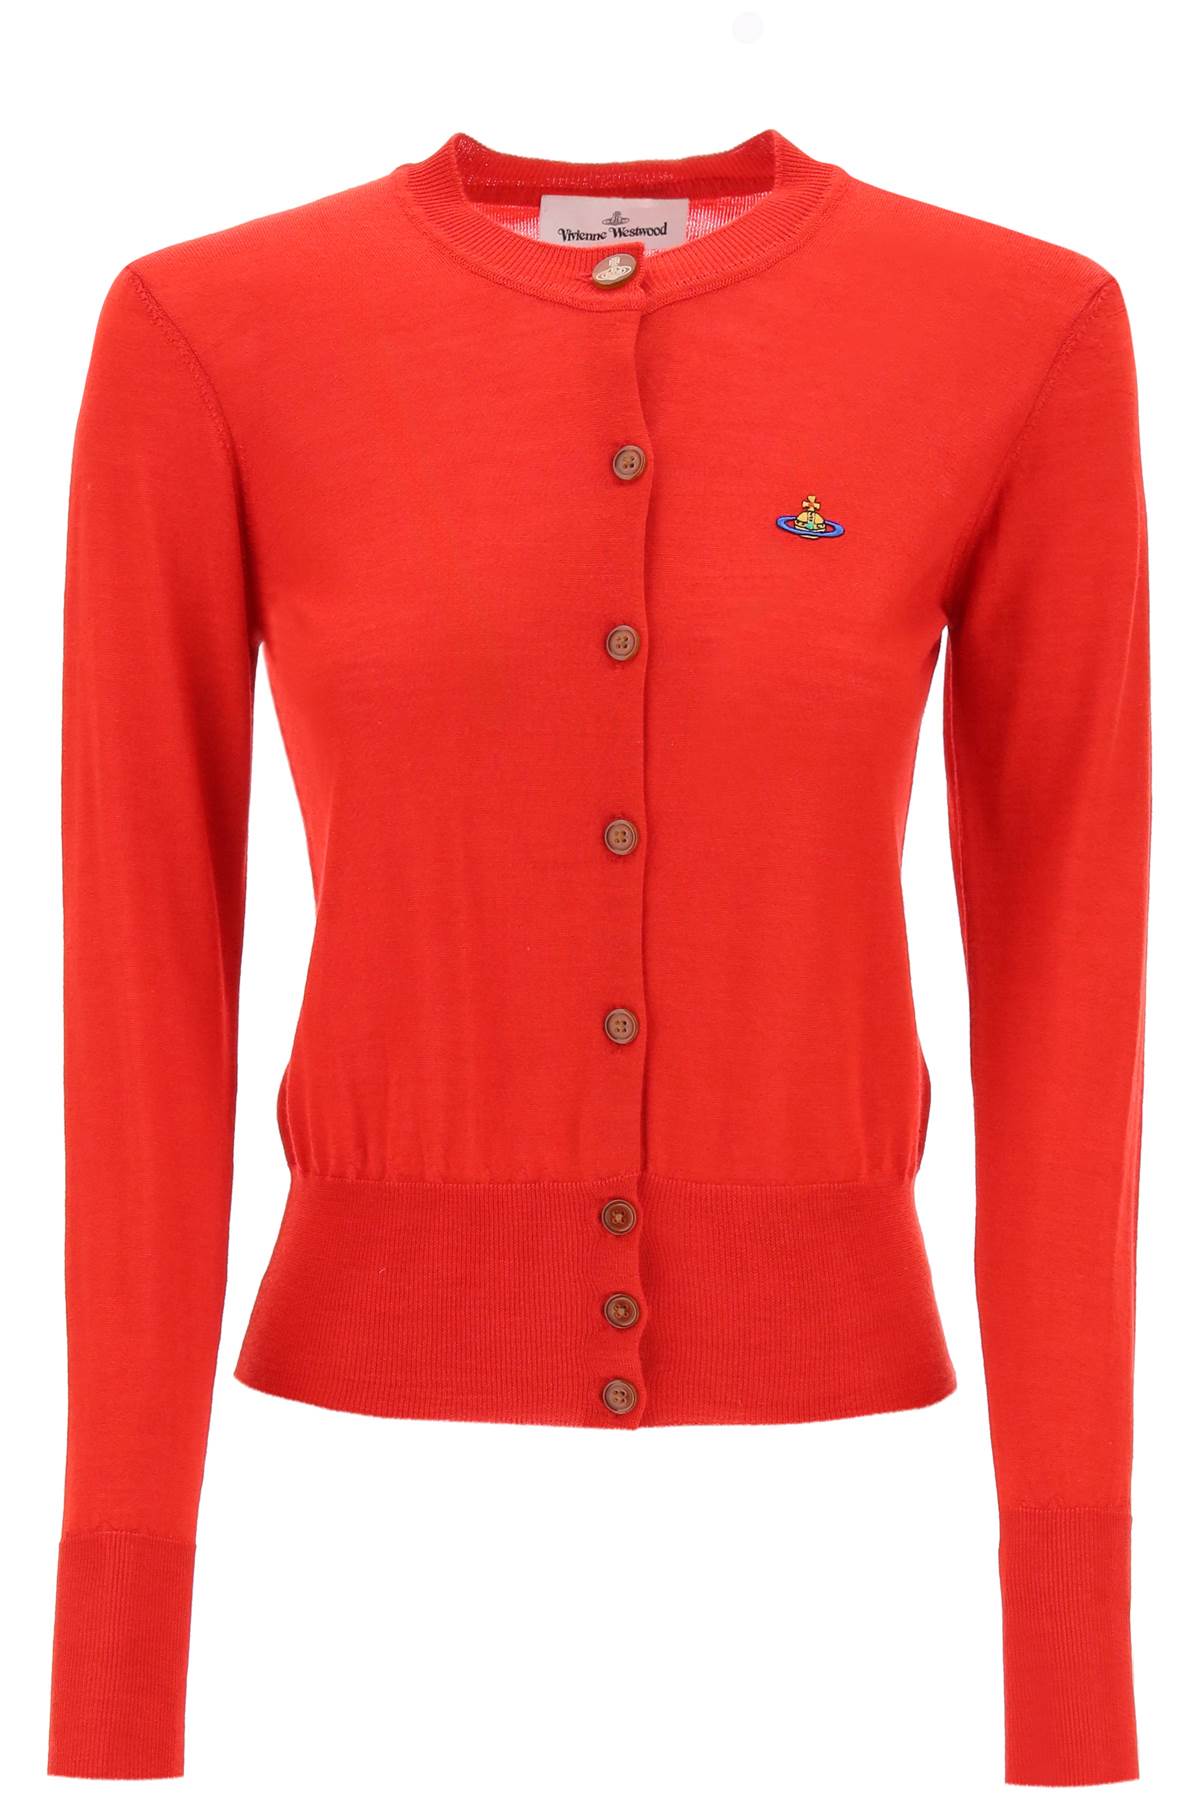 Vivienne westwood bea cardigan with embroidered logo 1803002PY001A RED